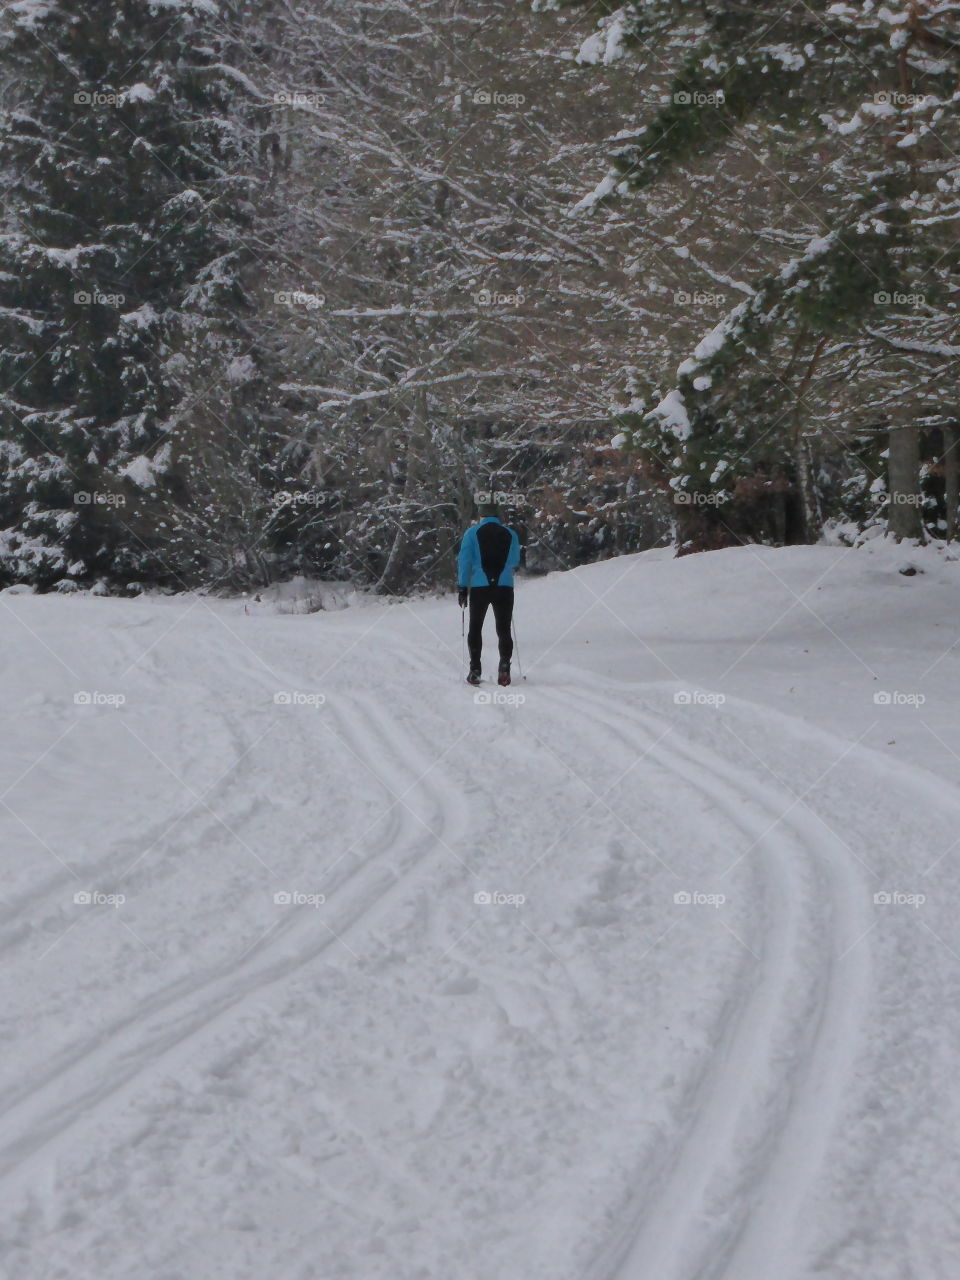 Skiing in the ski trails